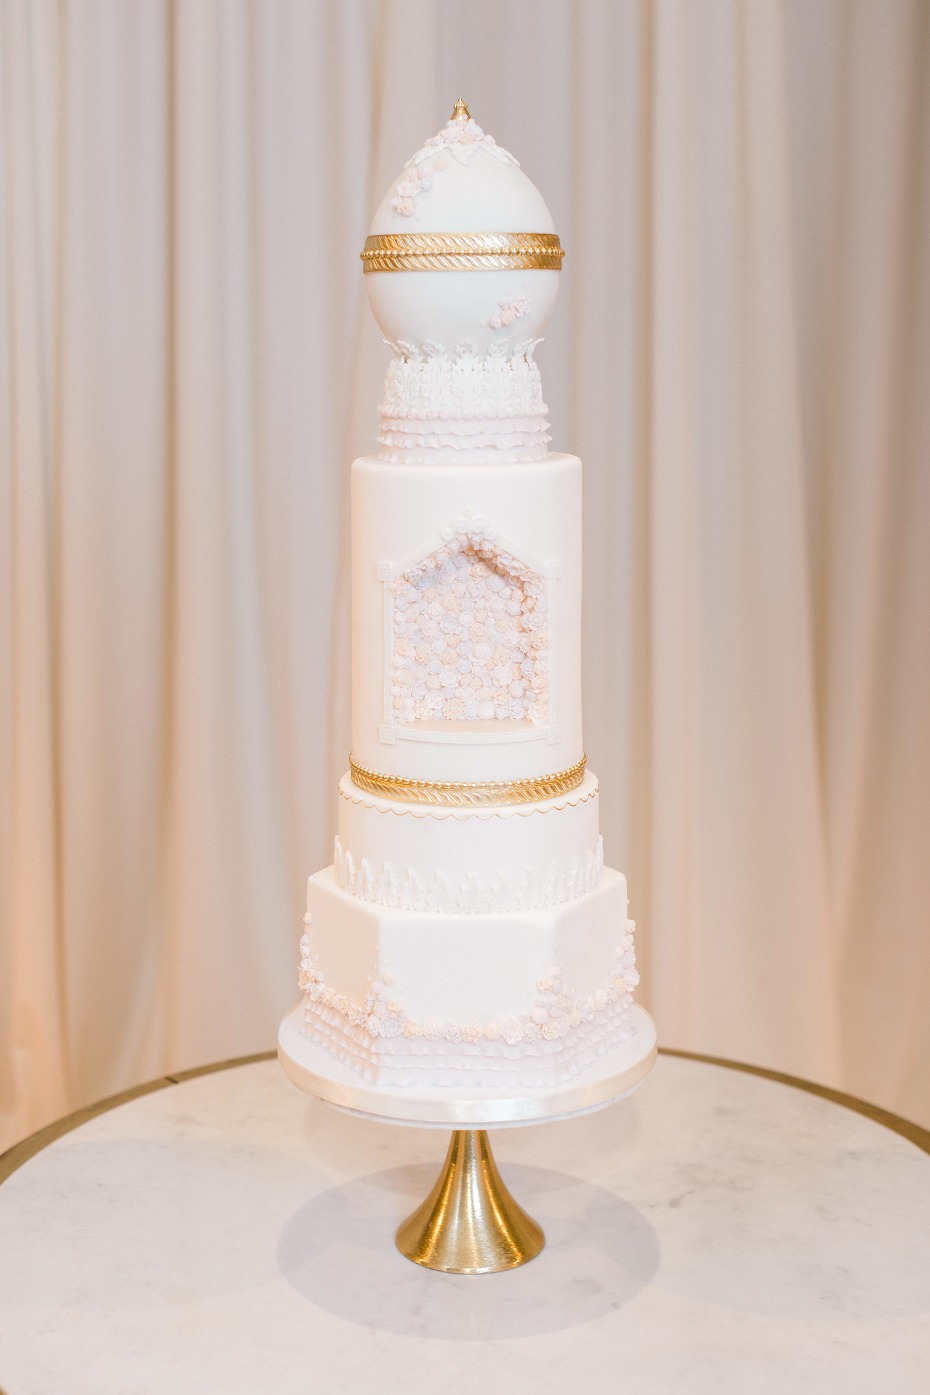 Faberge egg inspired wedding cake in gold and white